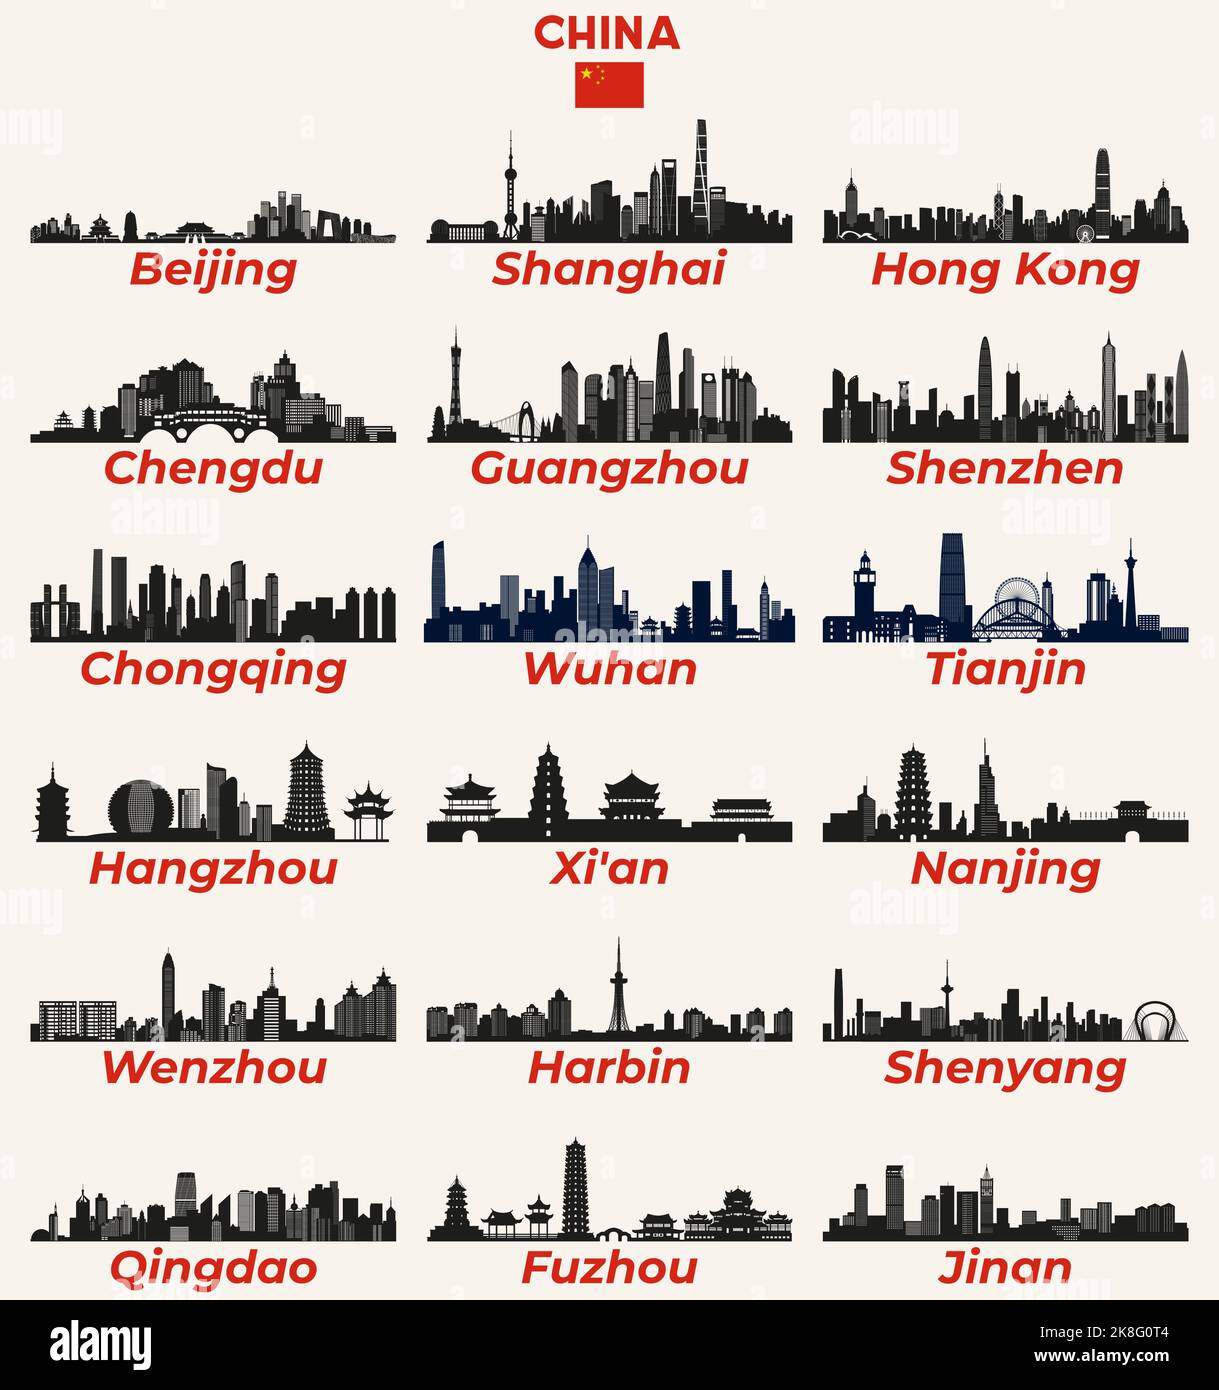 China cities skylines silhouettes vector set Stock Vector